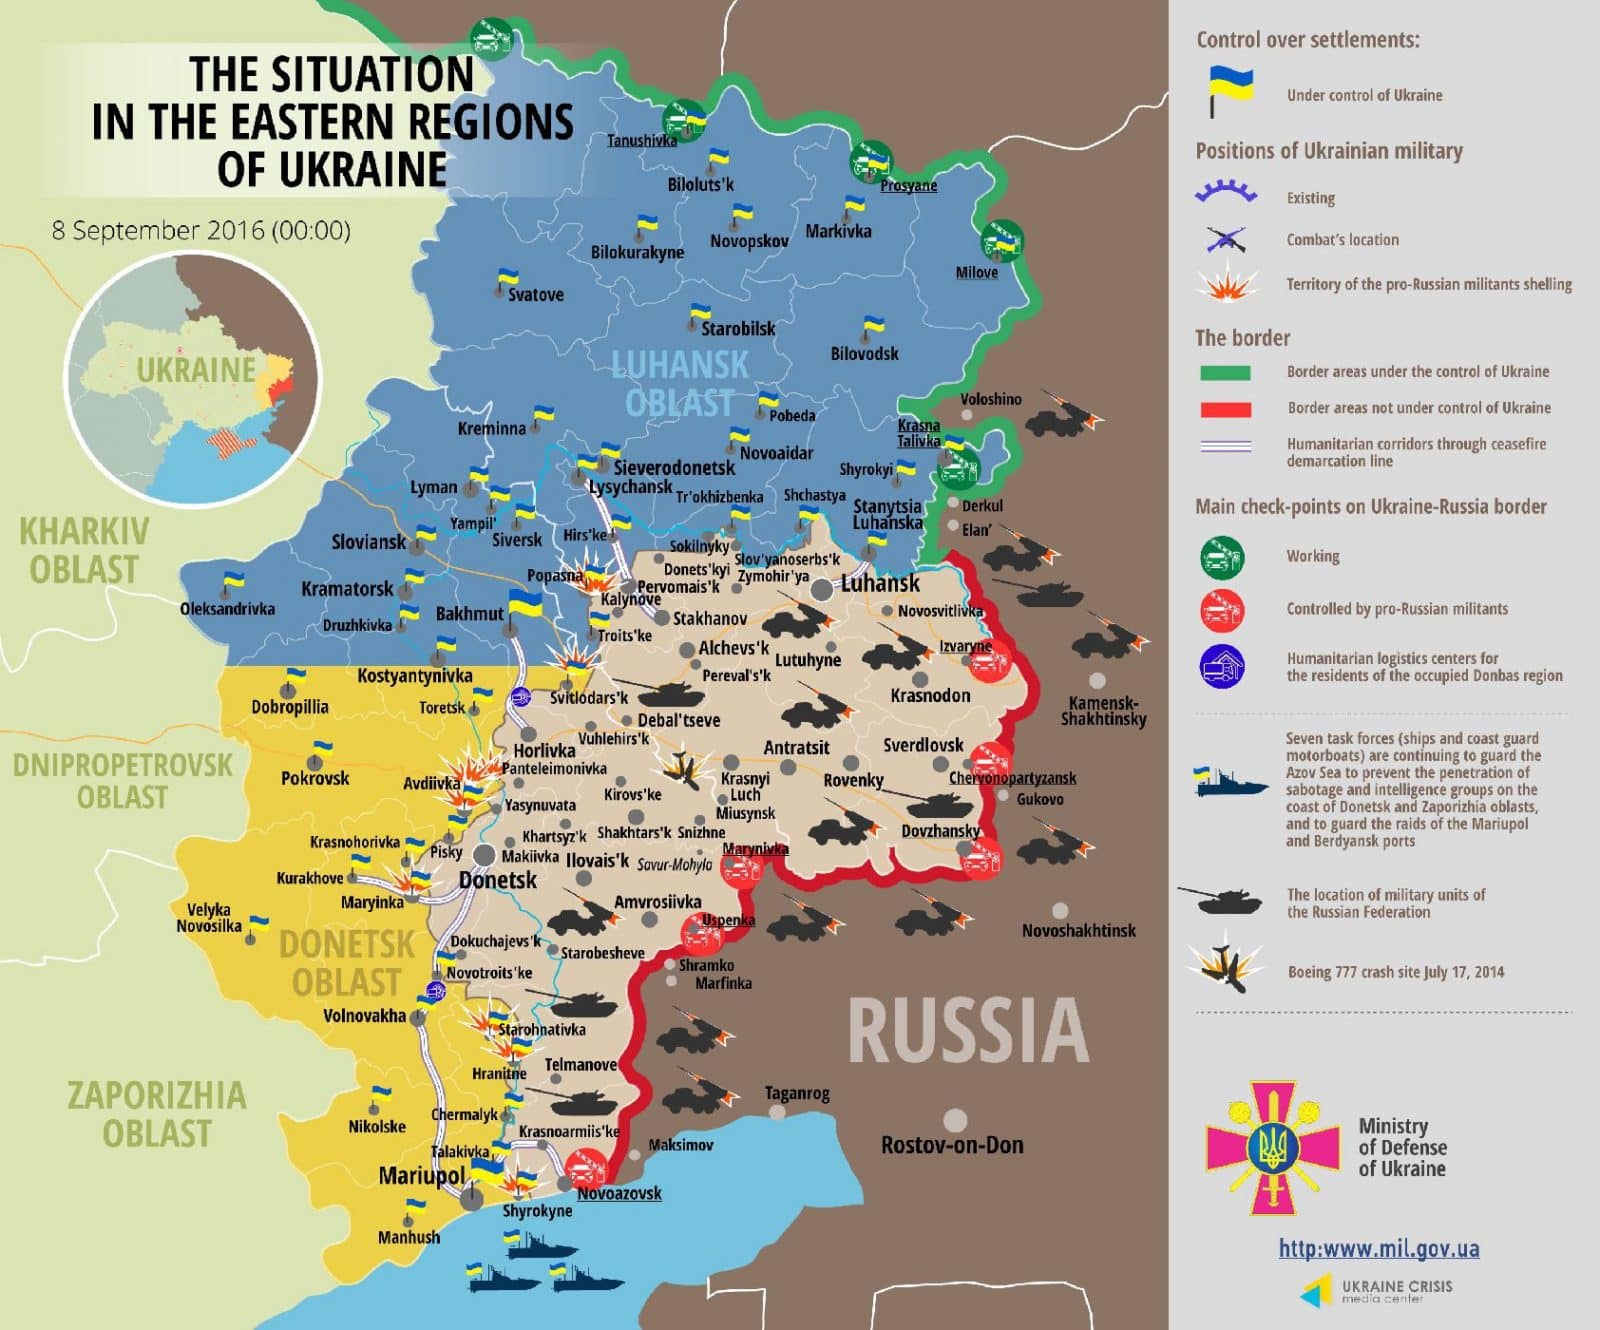 ”Silence mode in Donbas”: Russian troops attack Ukraine 20 times in 24 hours